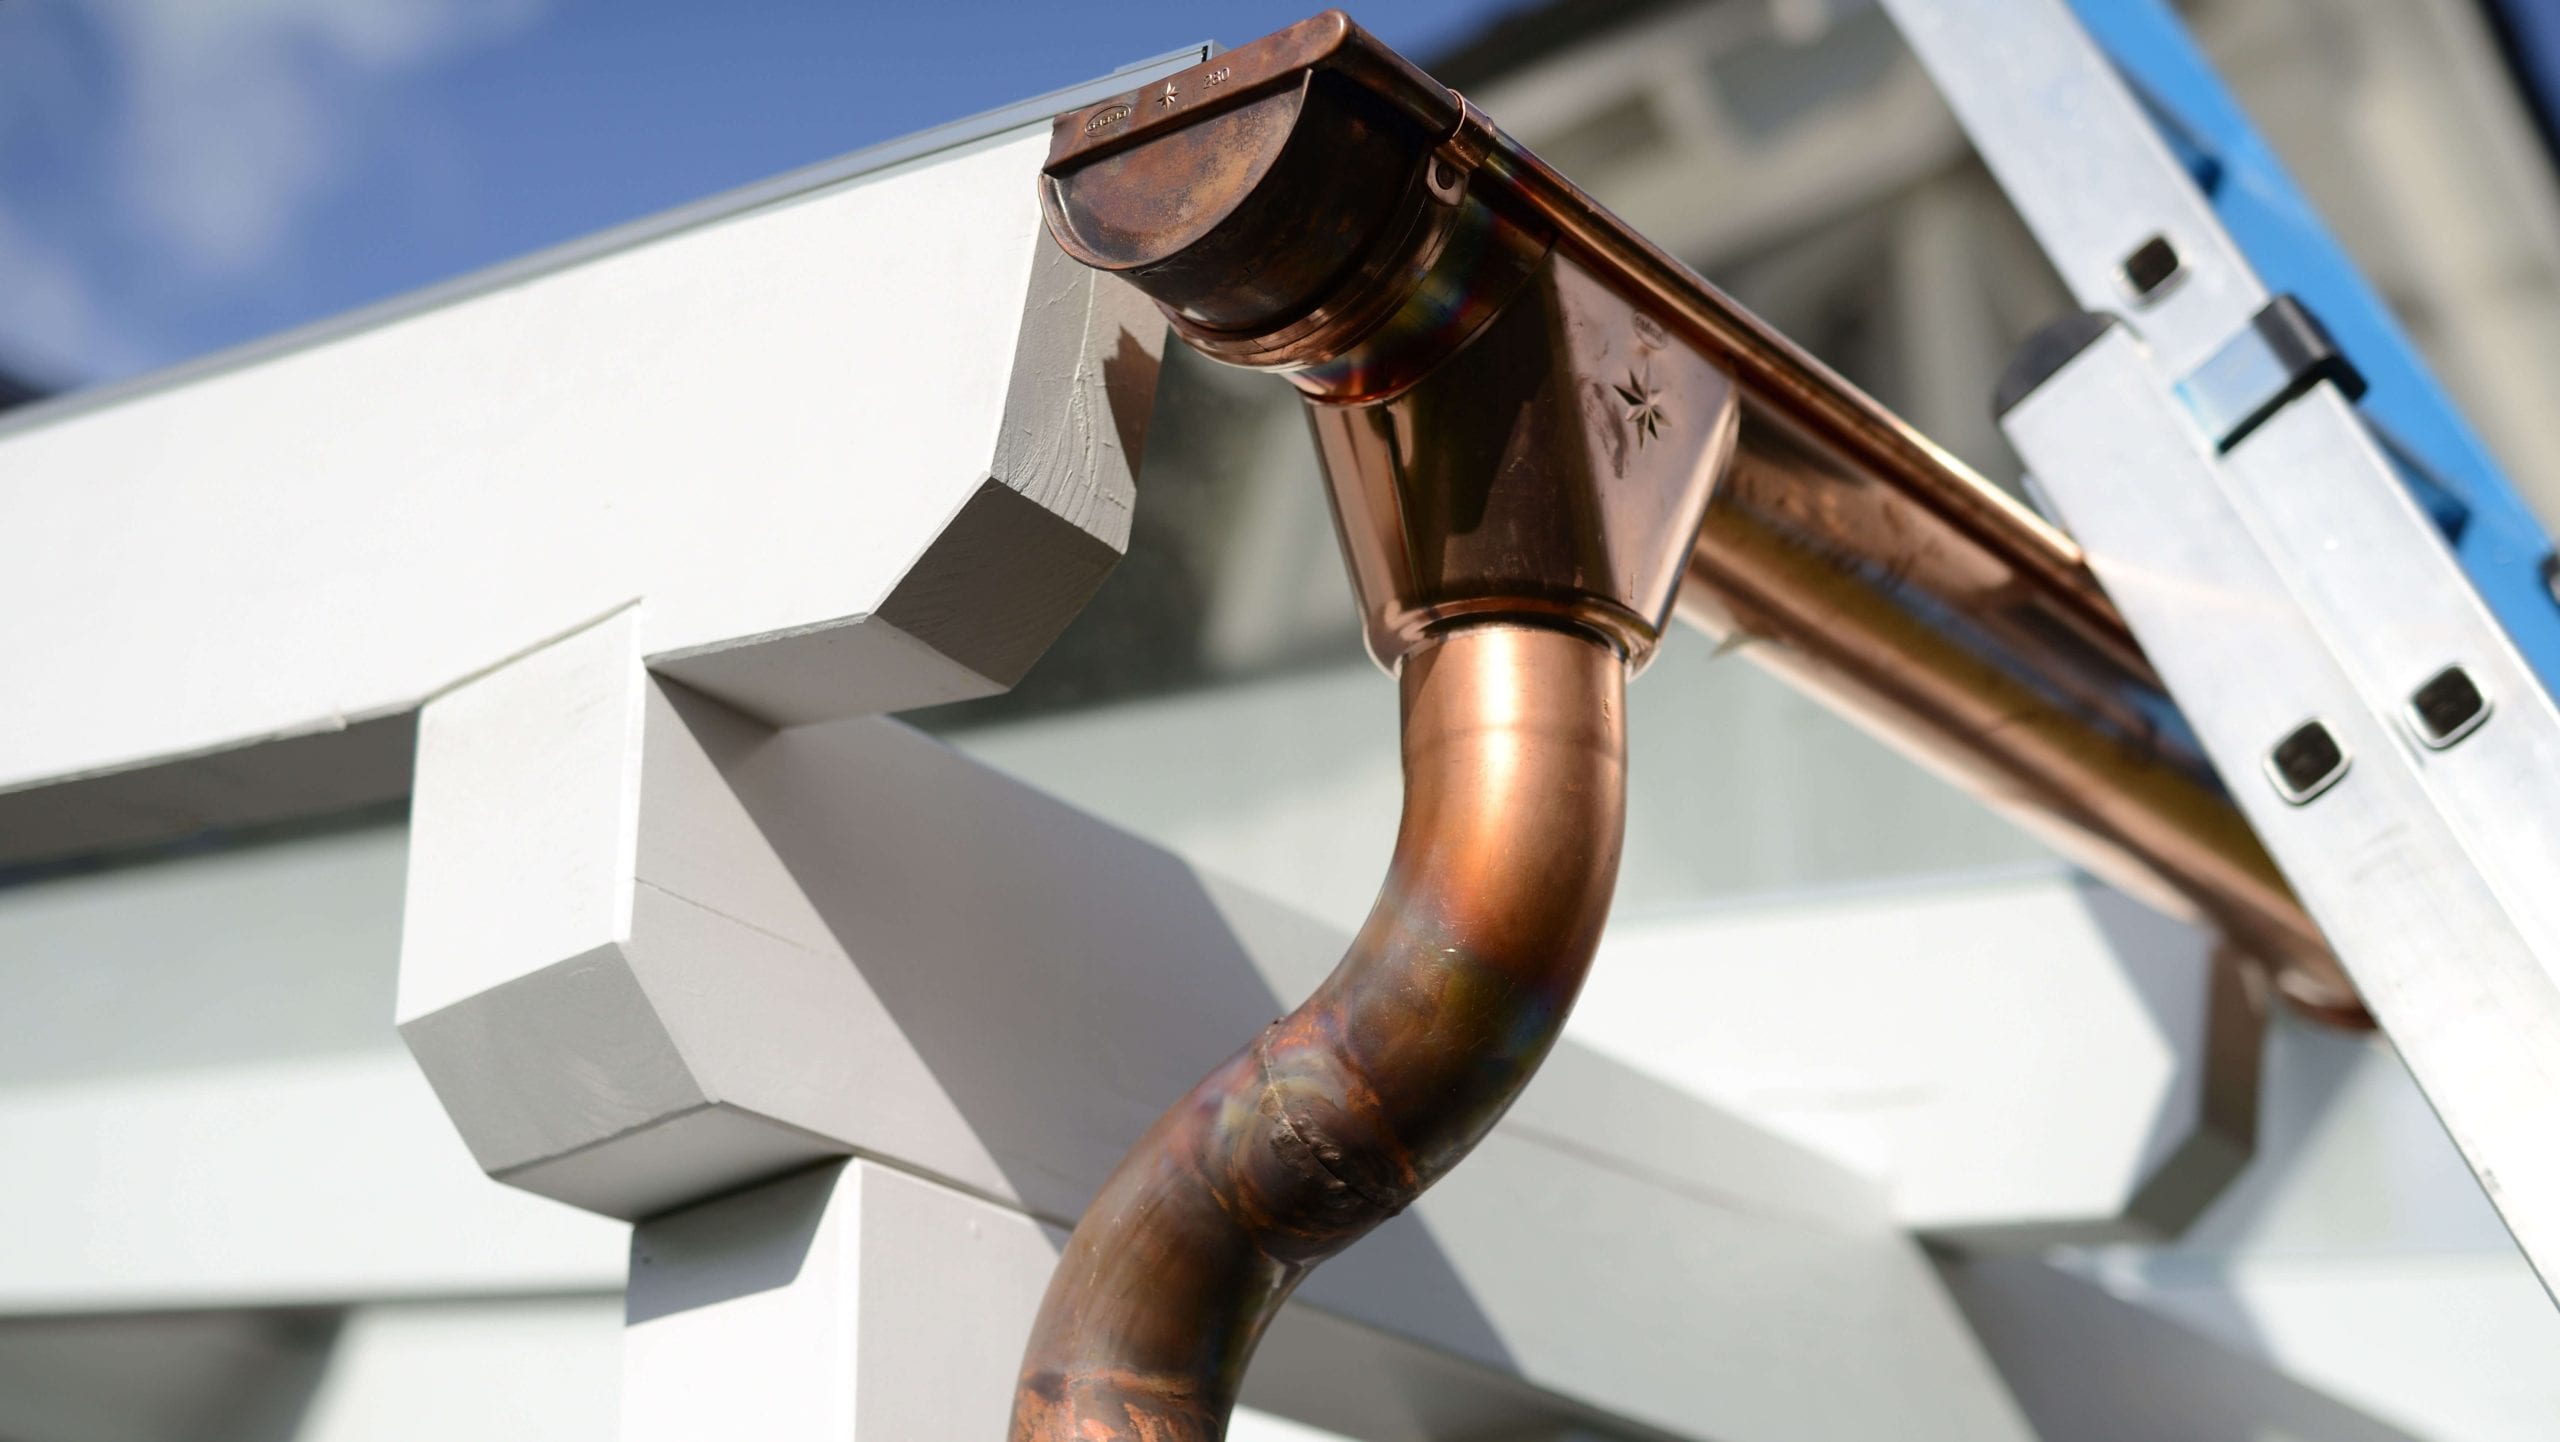 Make your property stand out with copper gutters. Contact for gutter installation in Hickory